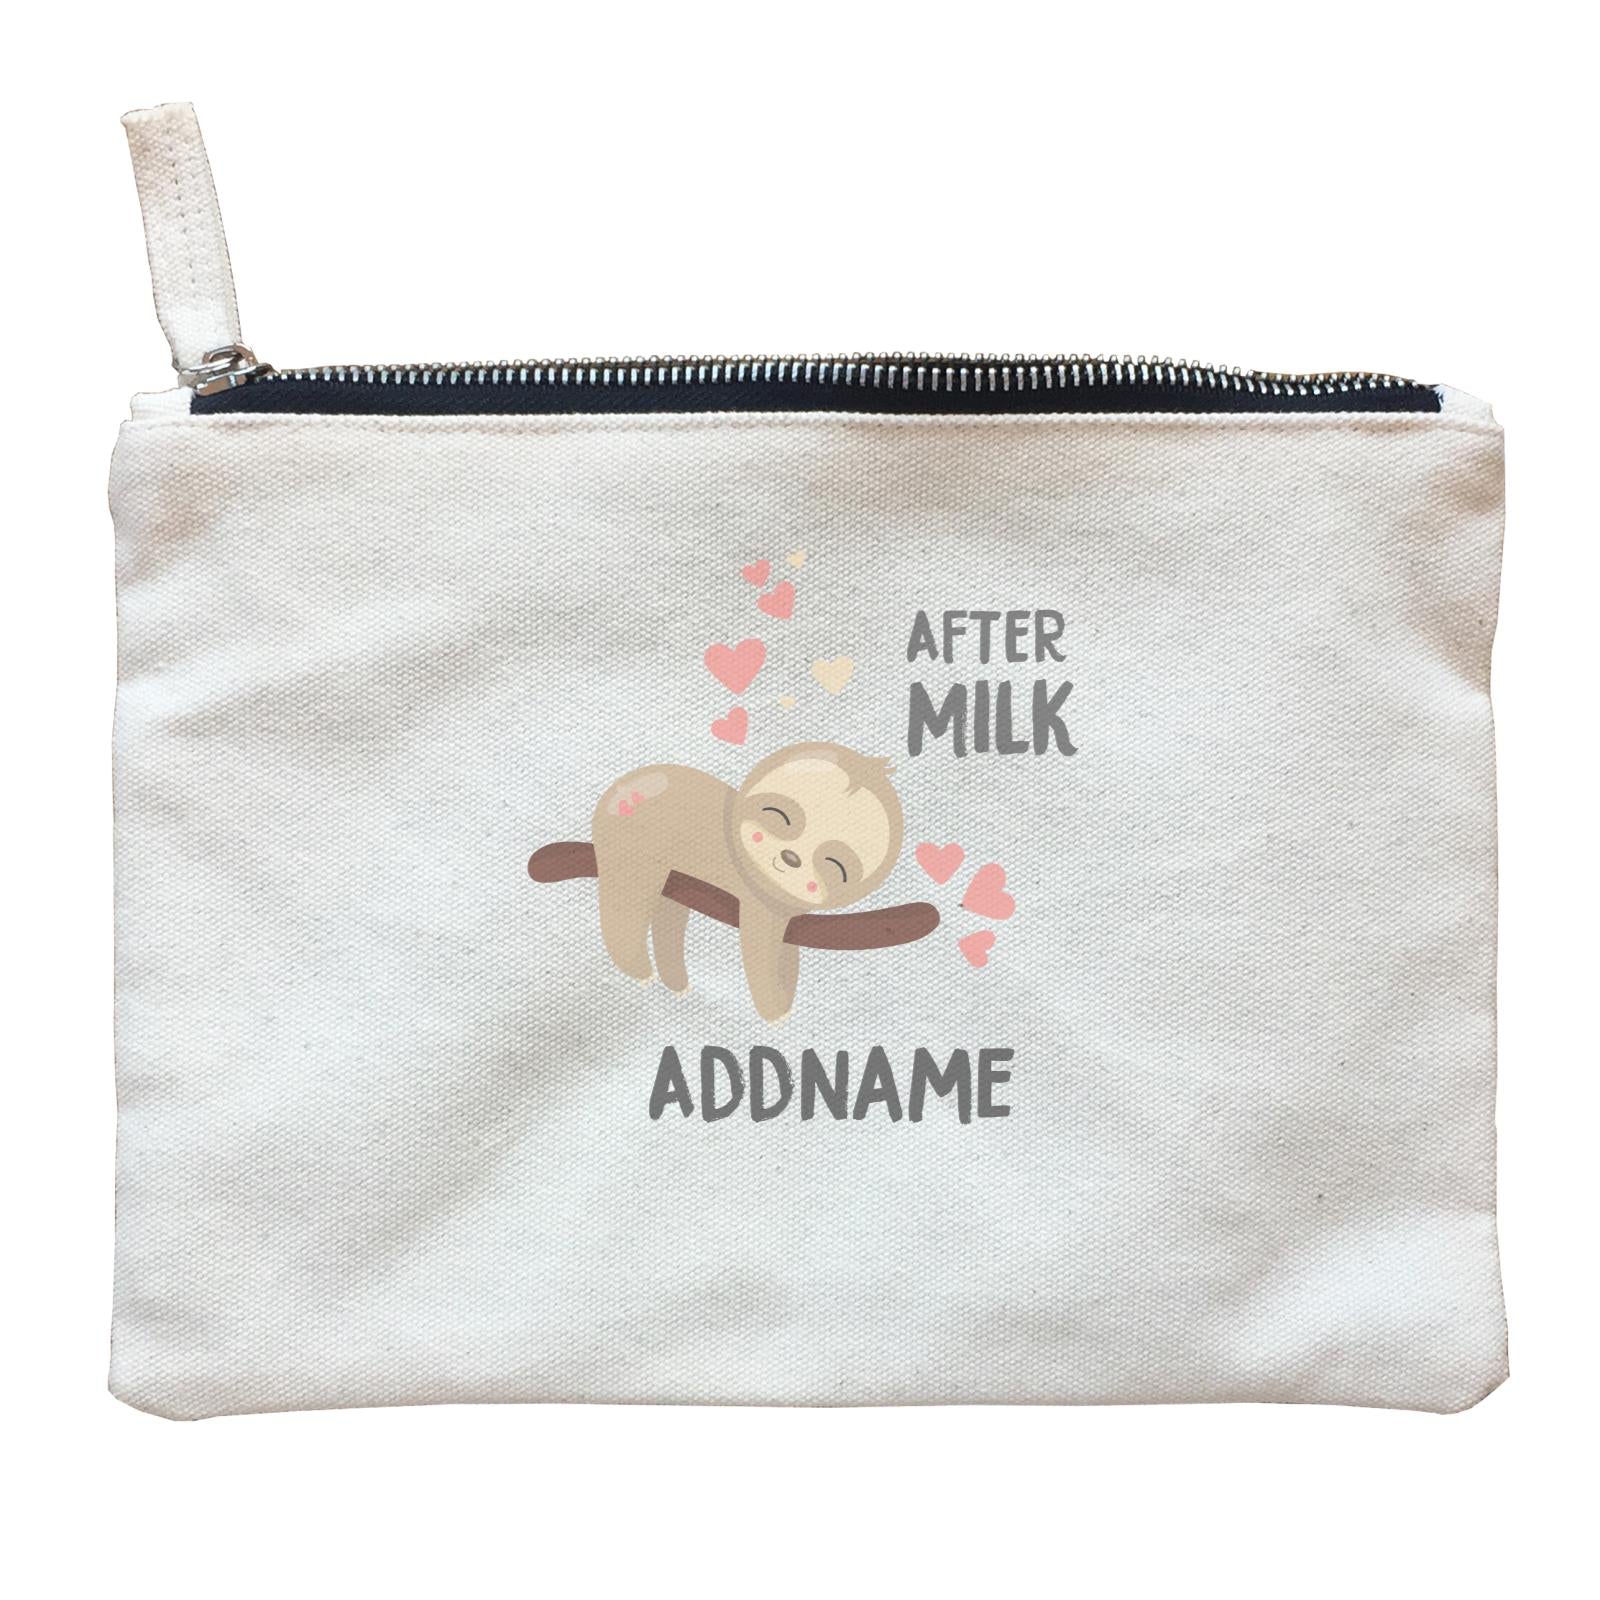 Cute Sloth After Milk Addname Zipper Pouch